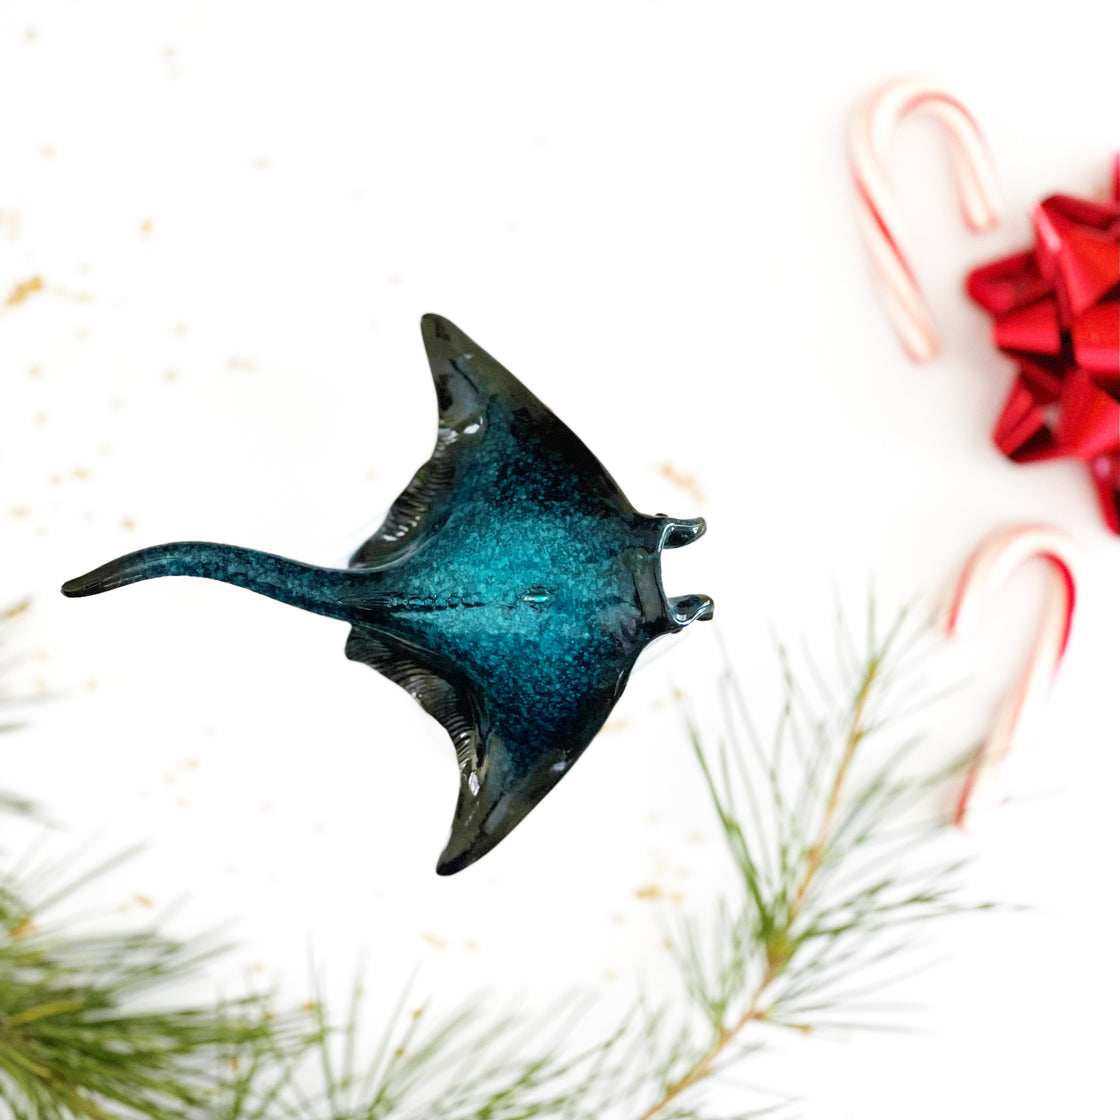 An ornament adorned with a manta ray design set against a background of pine tree leaves a festive red ribbon and Christmas candies by rengora